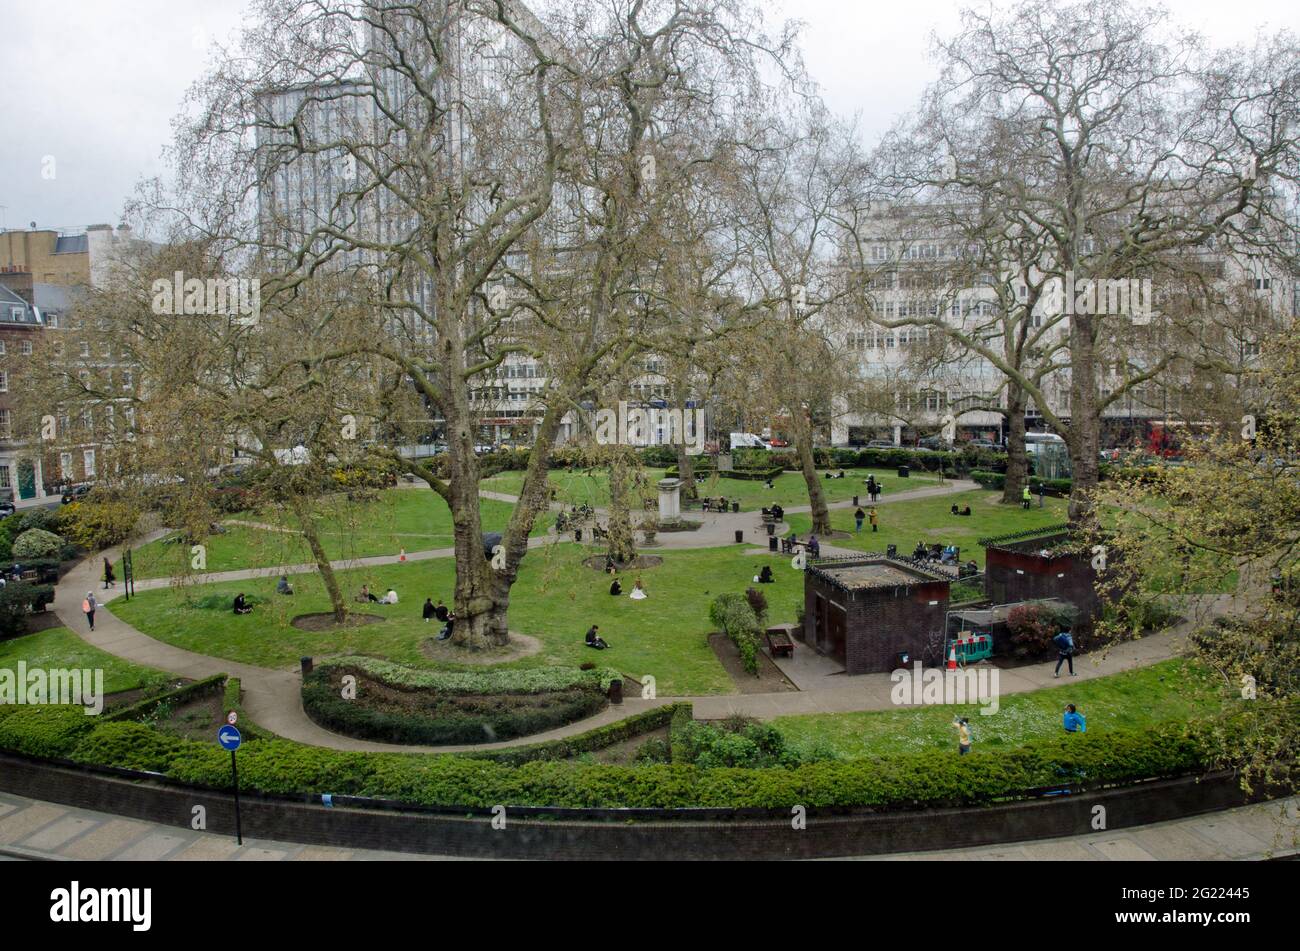 London, UK - April 21, 2021: Elevated view of Cavendish Square in Westminster, London.  People are making the most of this public open space just behi Stock Photo